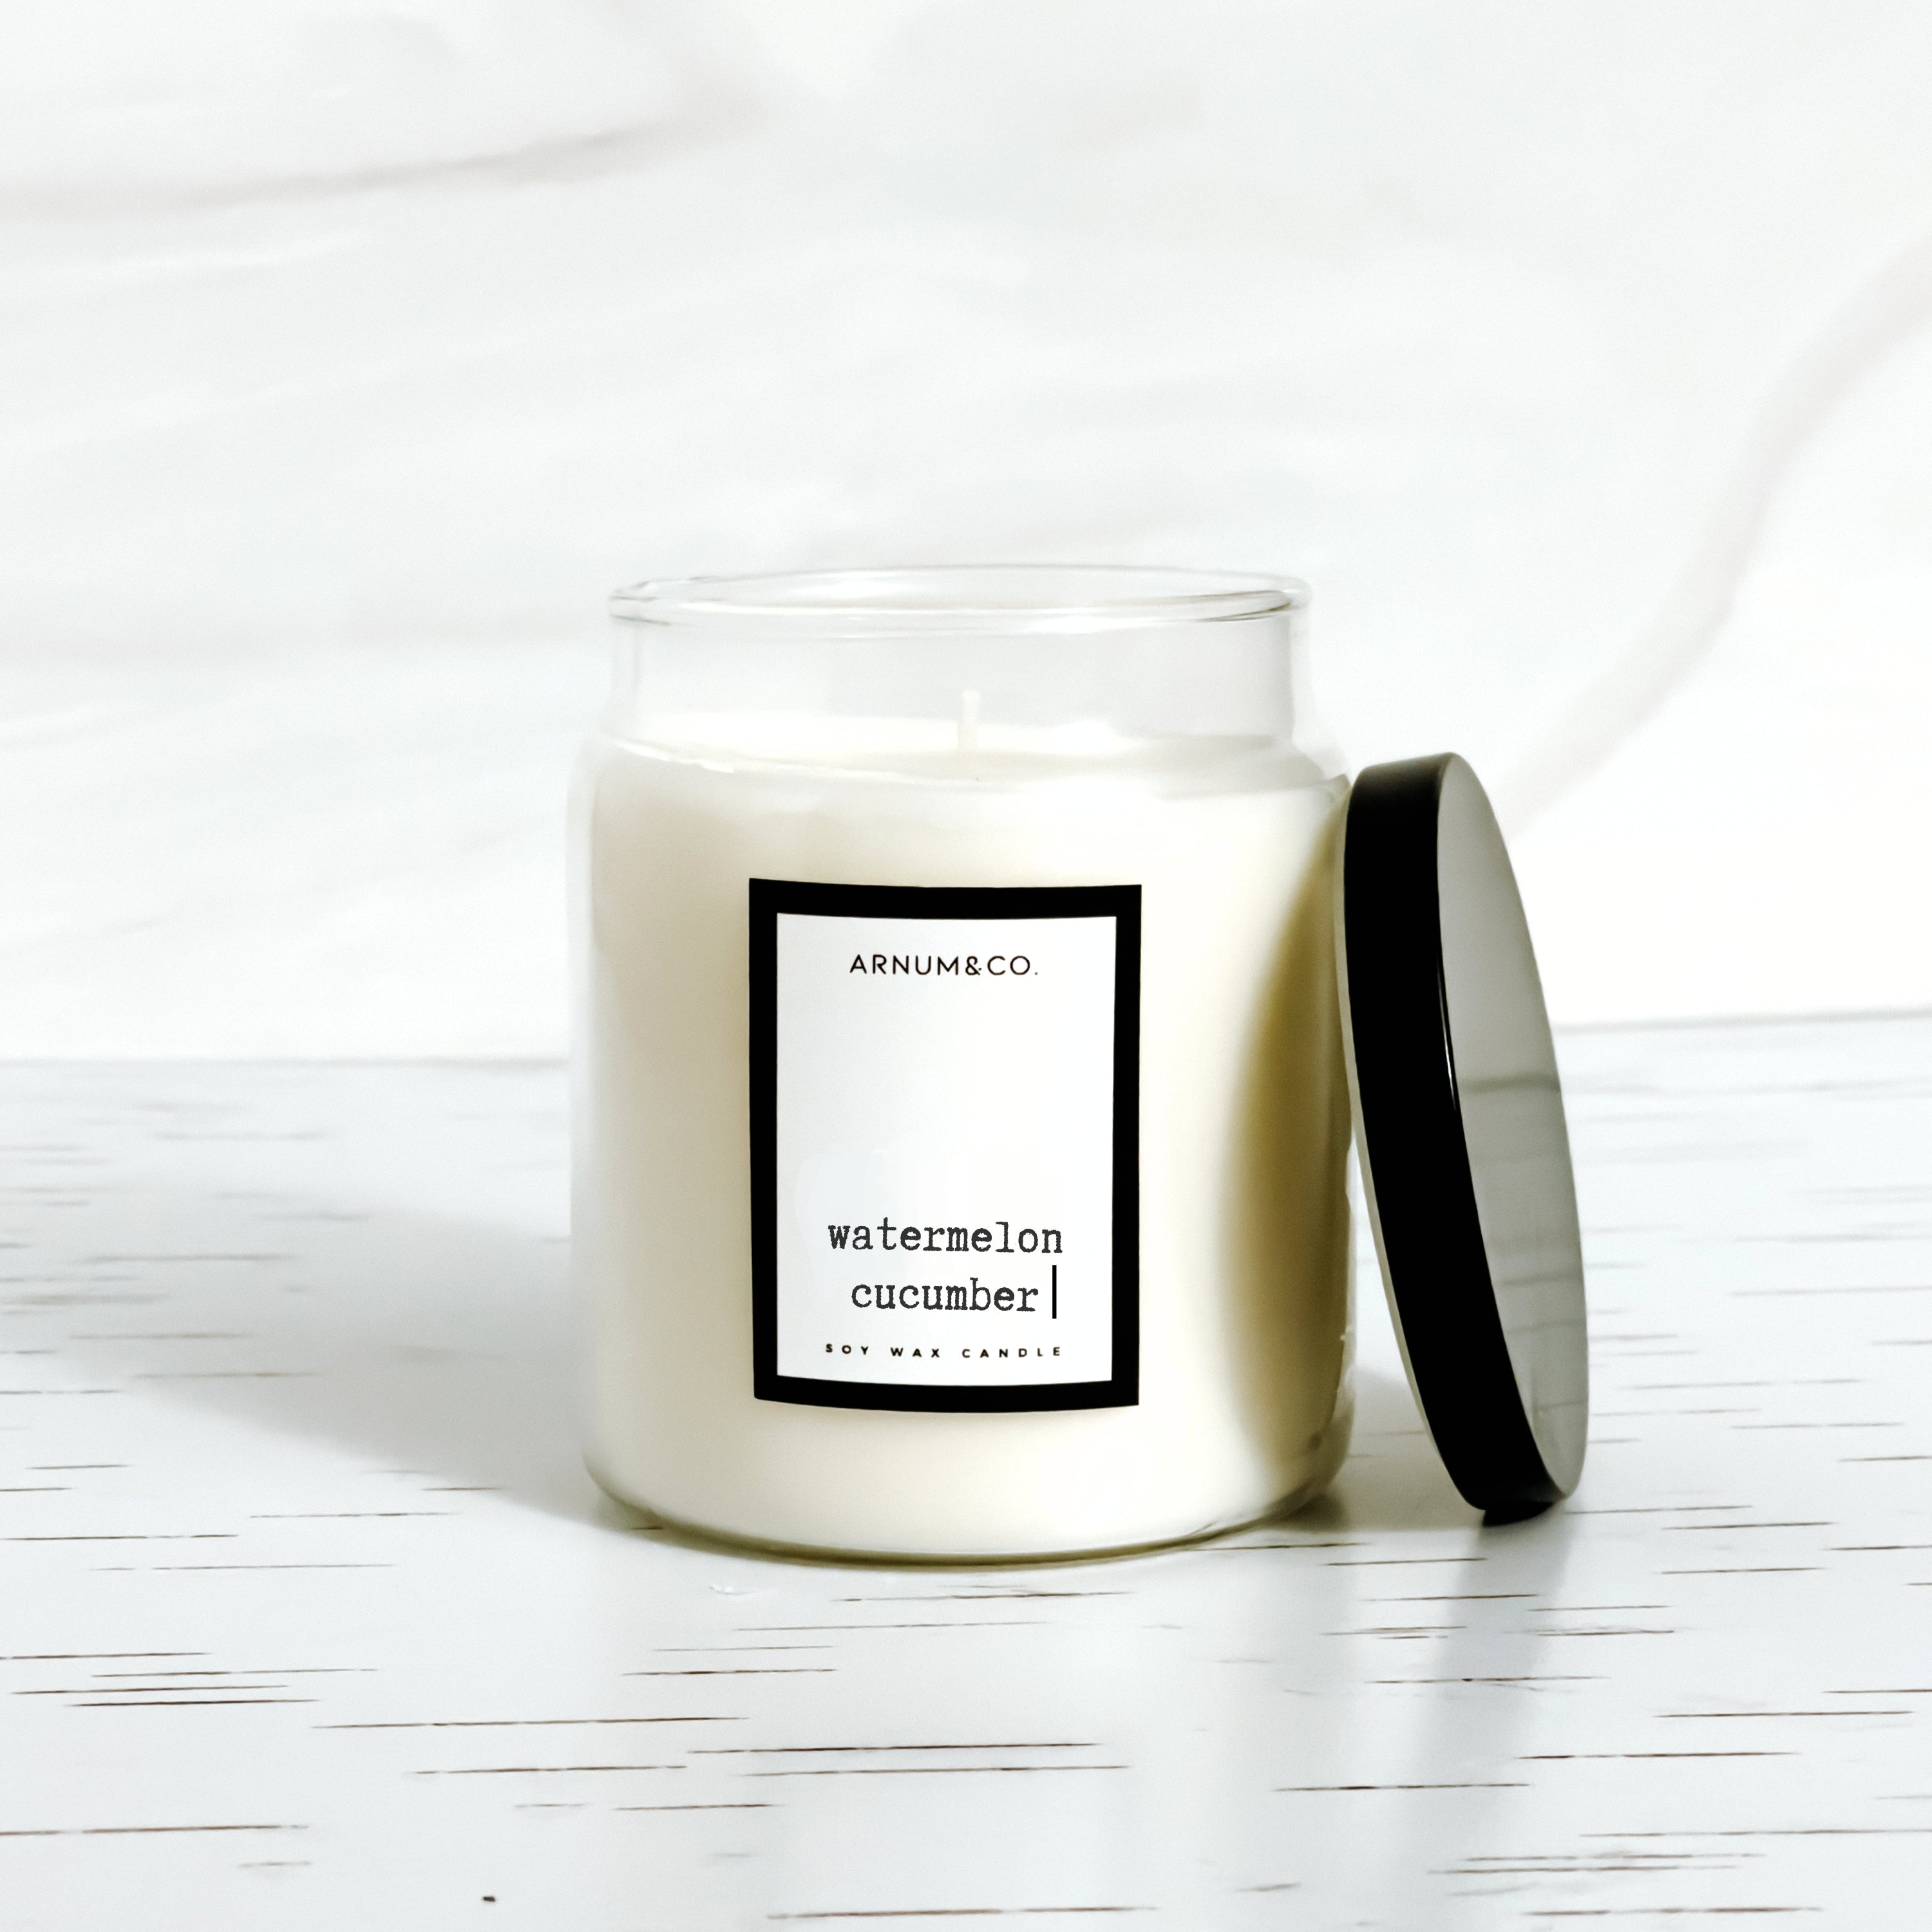 watermelon cucumber | soy wax candle